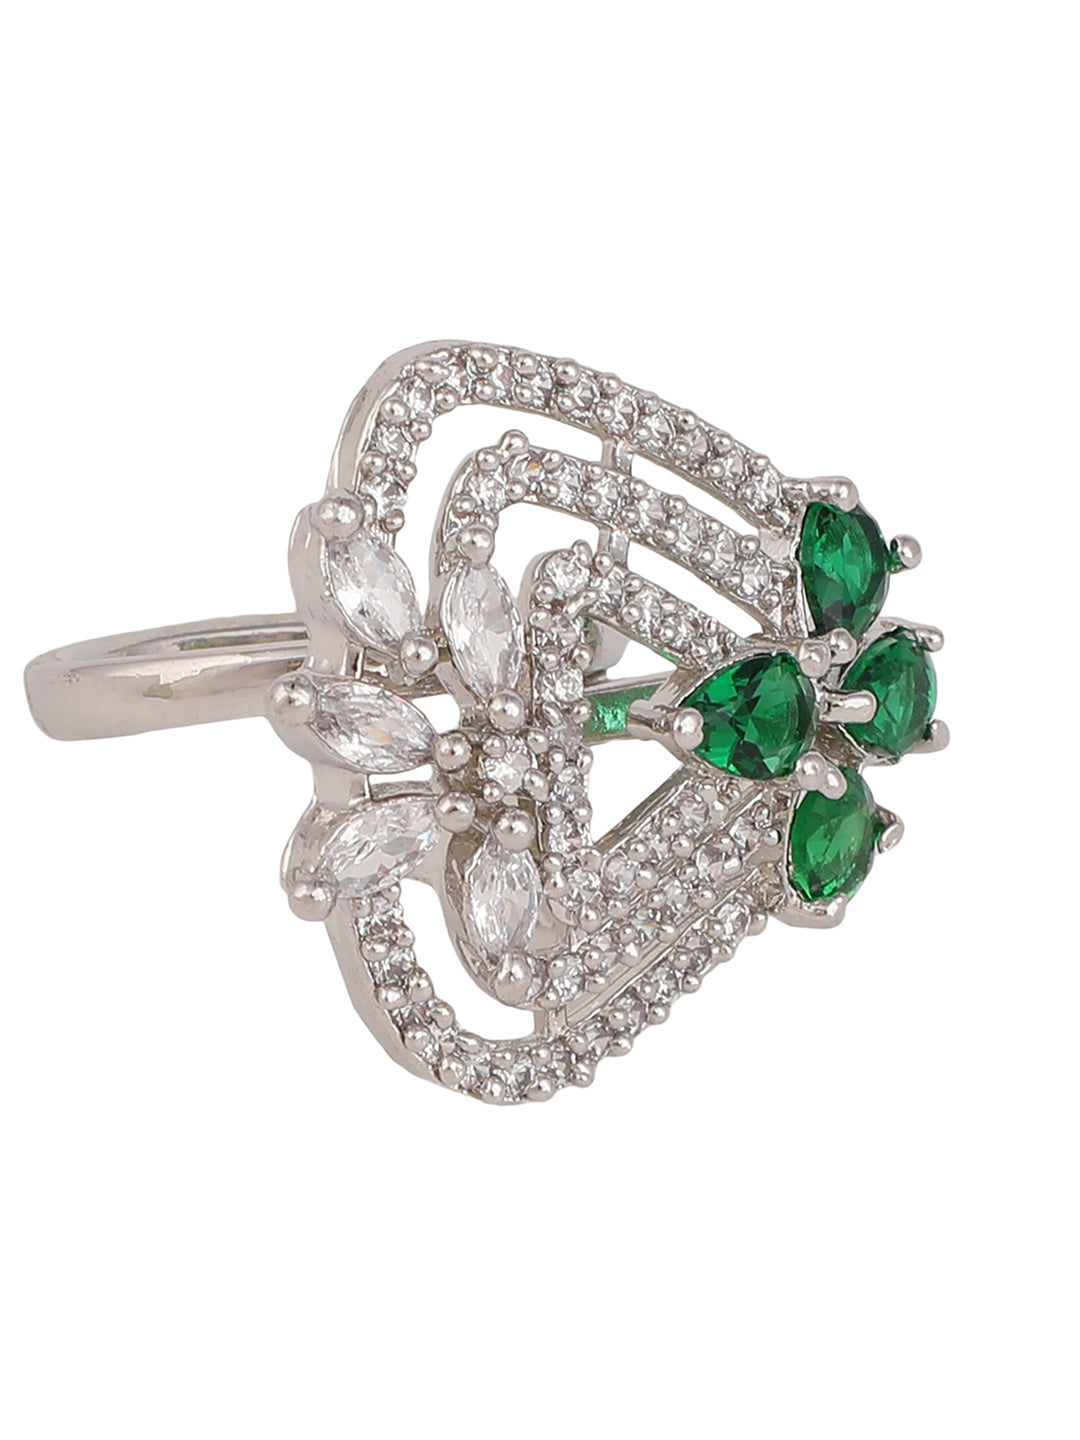 Women's Silver-Plated Green & White Ad-Studded Adjustable Finger Ring - Anikas Creation